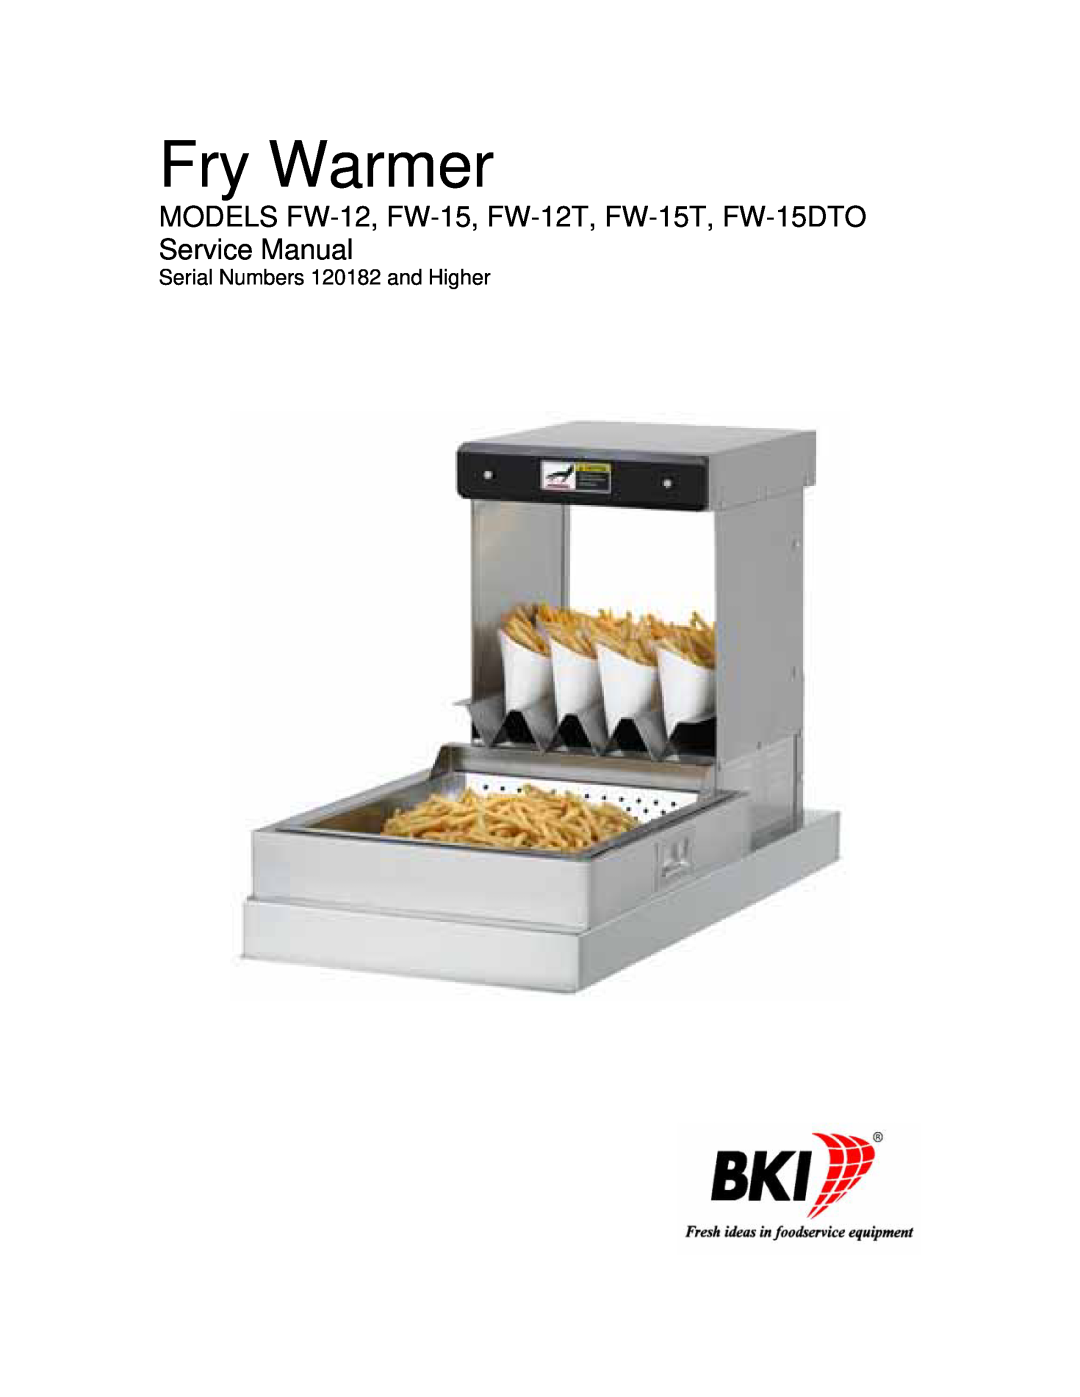 Bakers Pride Oven FW-12T, FW-15T, FW-15DTO manual Fry Warmer, Serial Numbers 120182 and Higher 